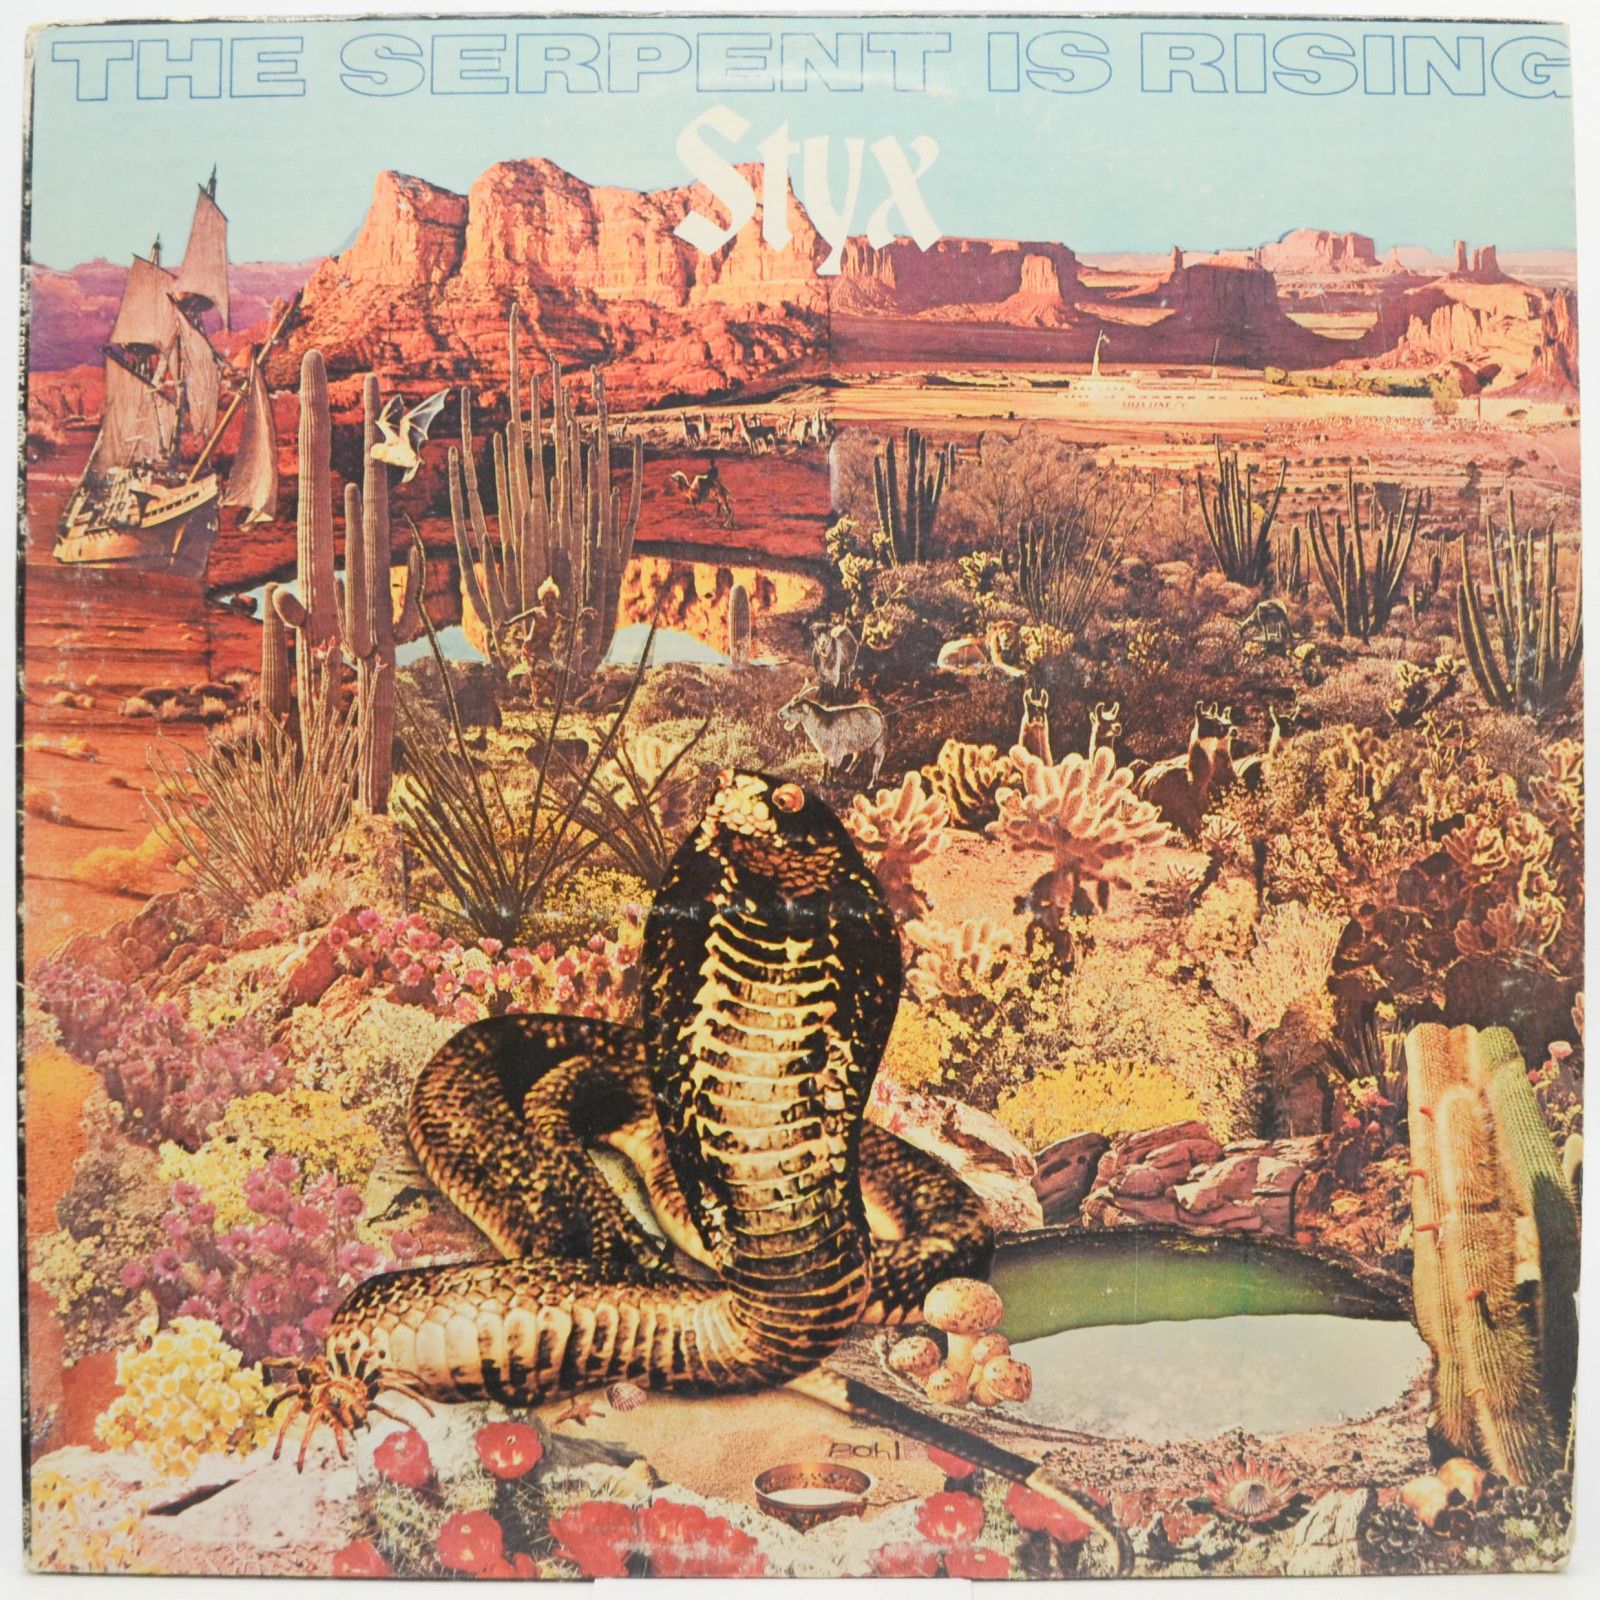 Styx — The Serpent Is Rising (1-st, USA), 1973